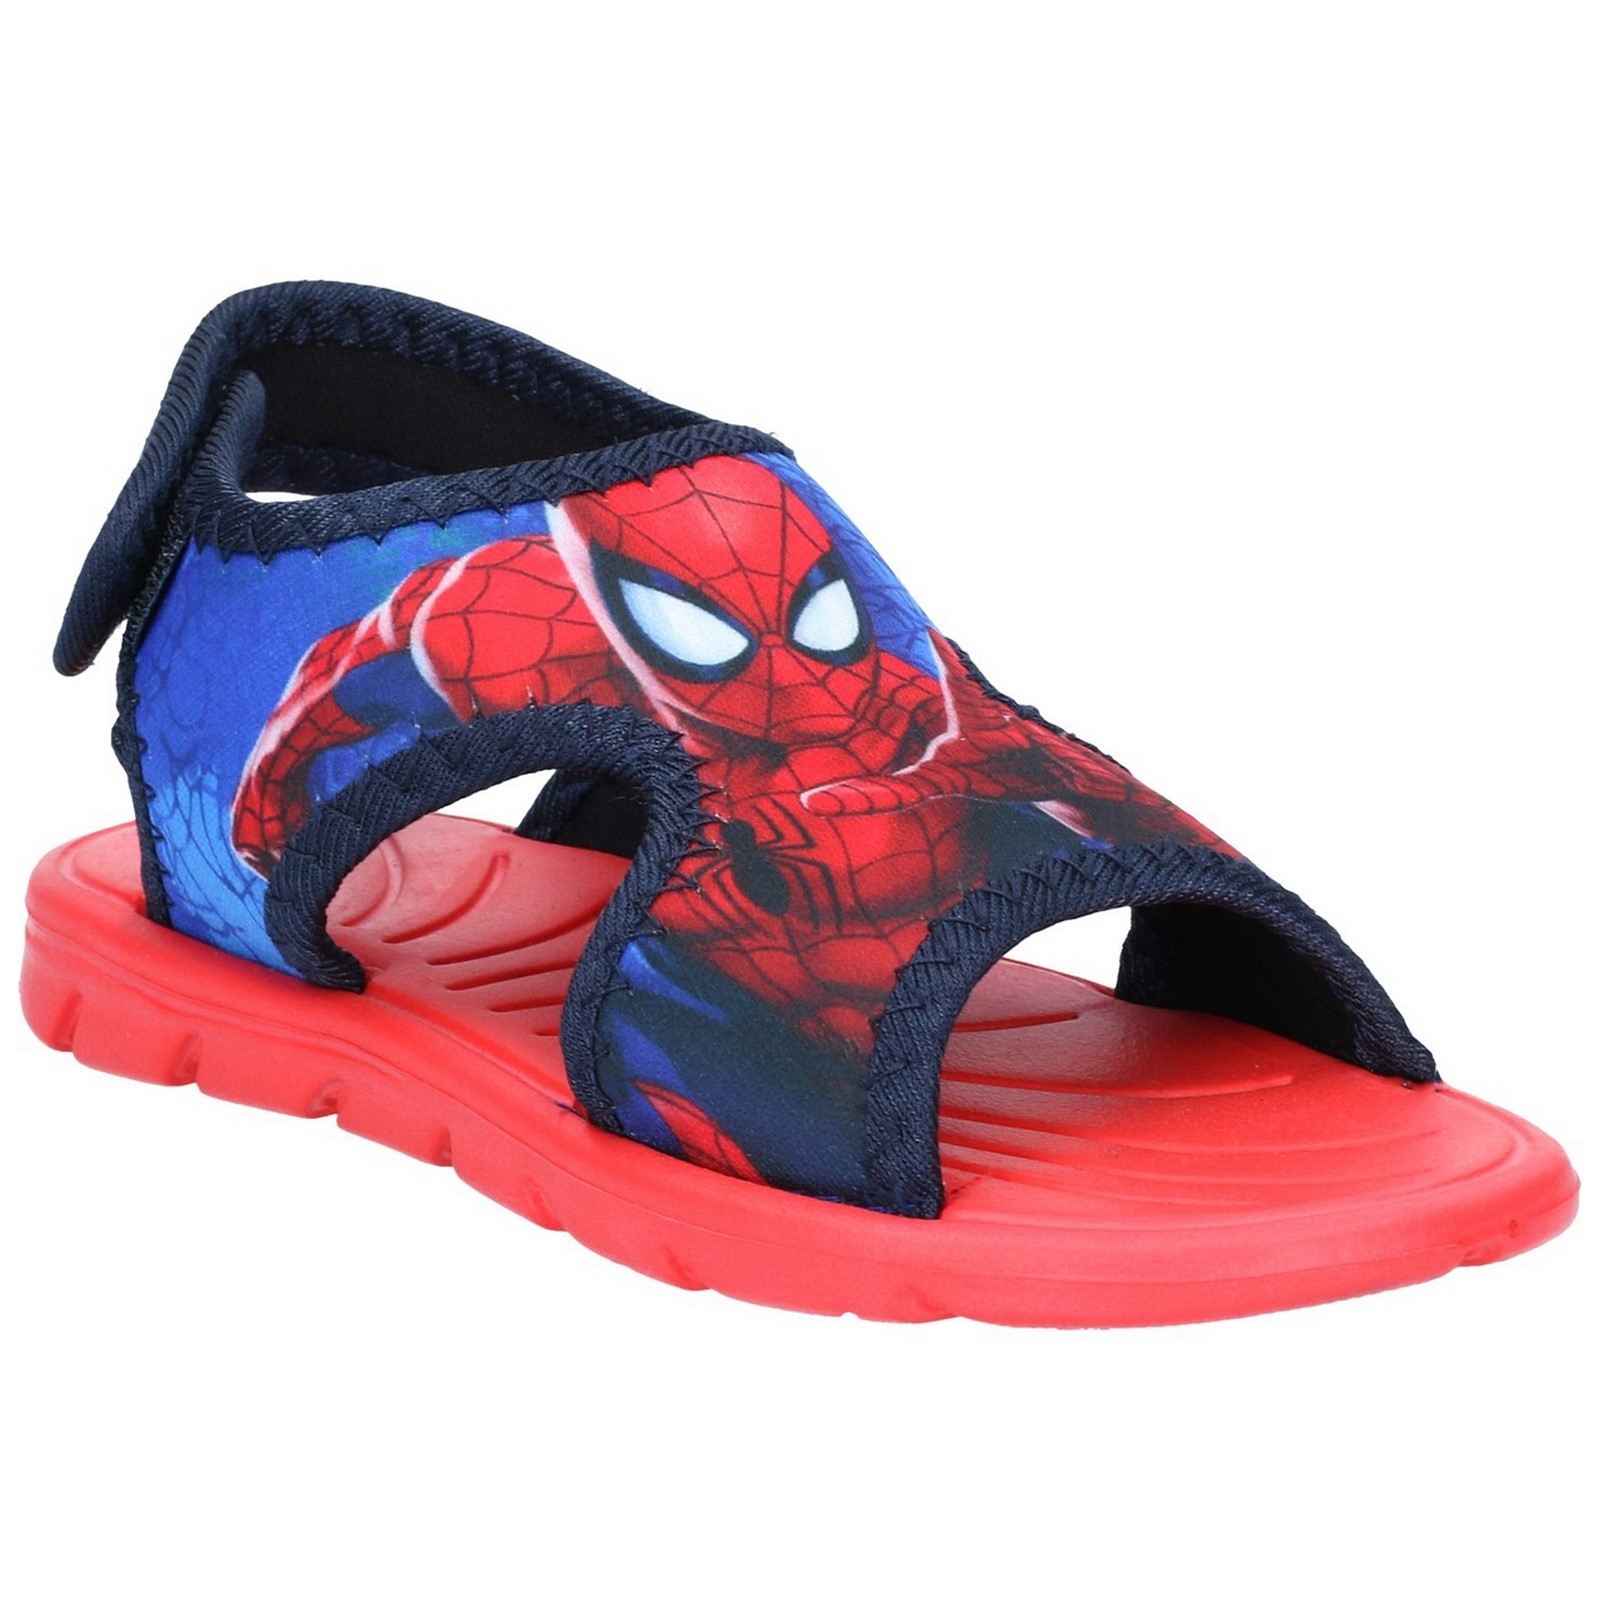 Spiderman Classic Sandals touch fastening shoe